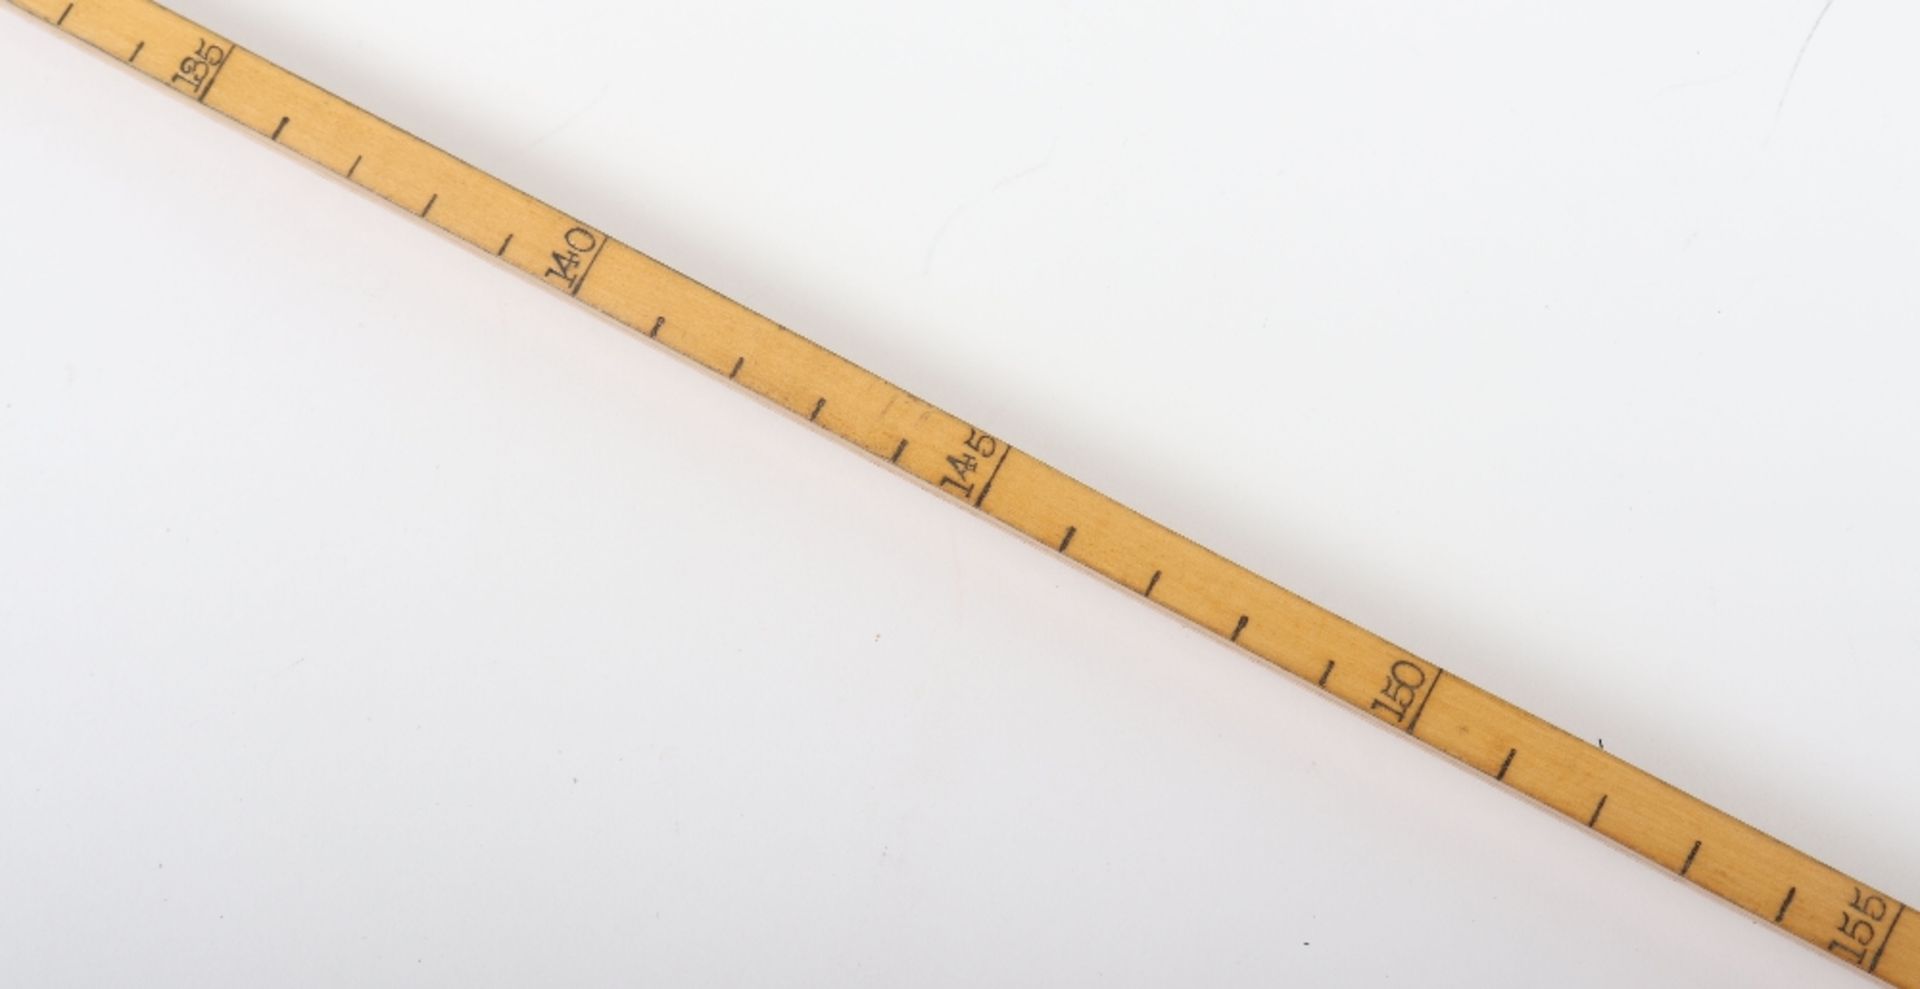 An Edwardian walking stick with spirit level (lacking liquid) and scaled ruler, with horn handle - Image 8 of 14